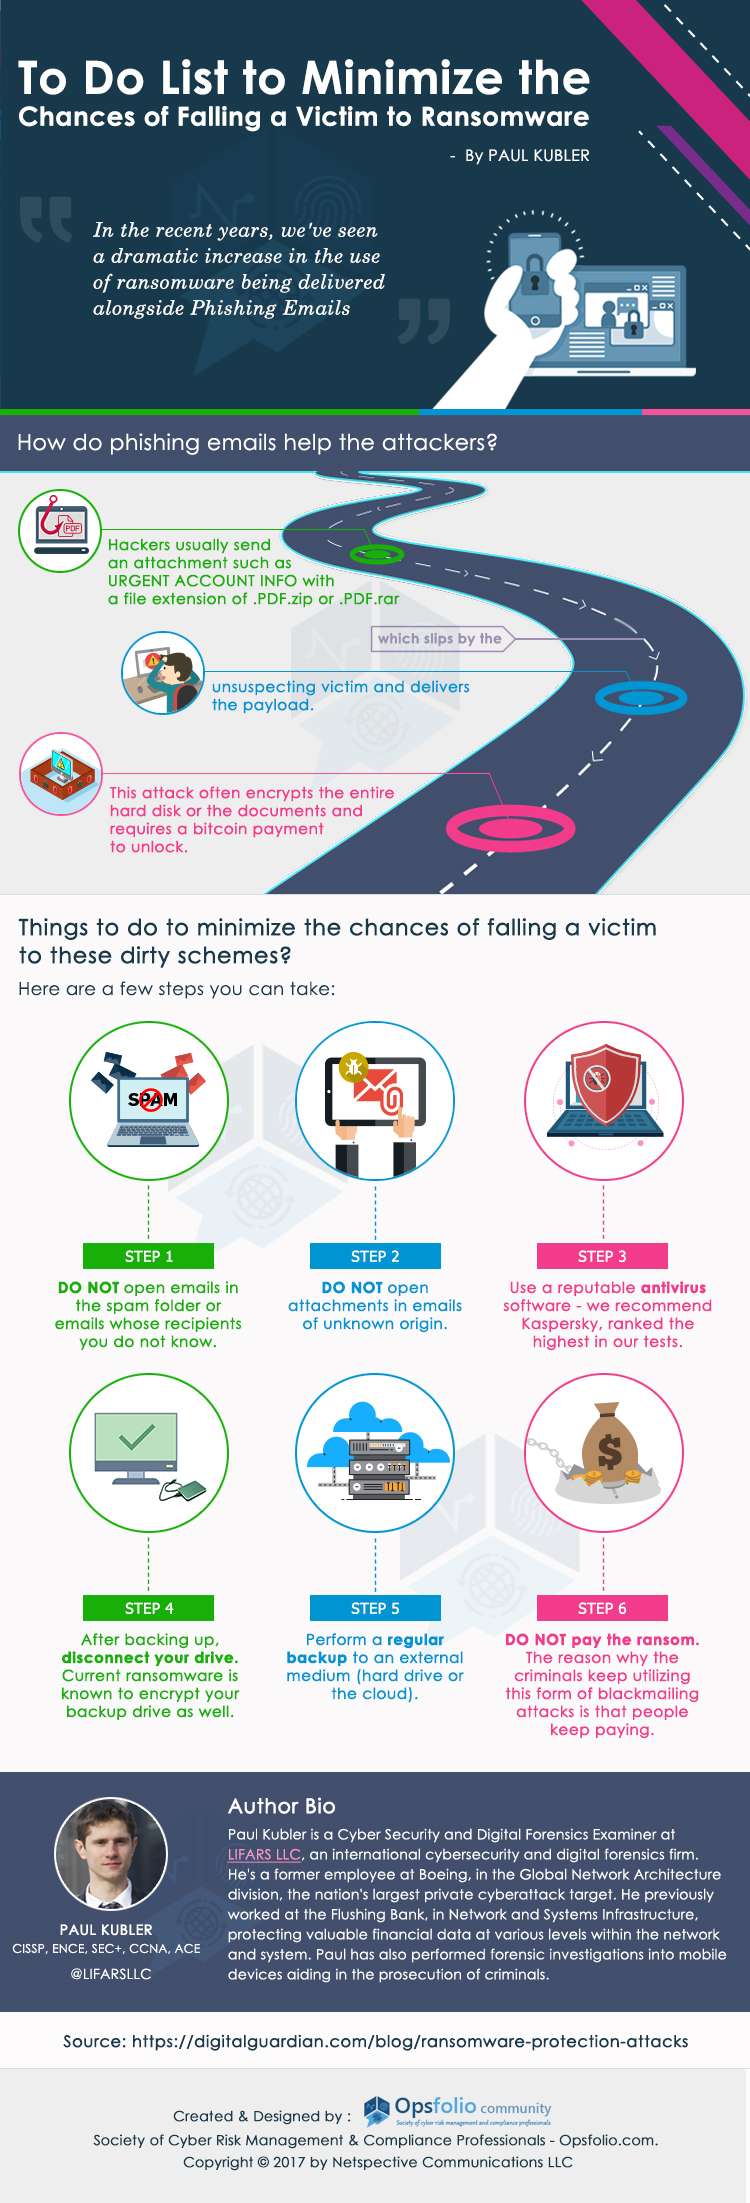 To Do List to Minimize the Chances of Falling a Victim to Ransomware